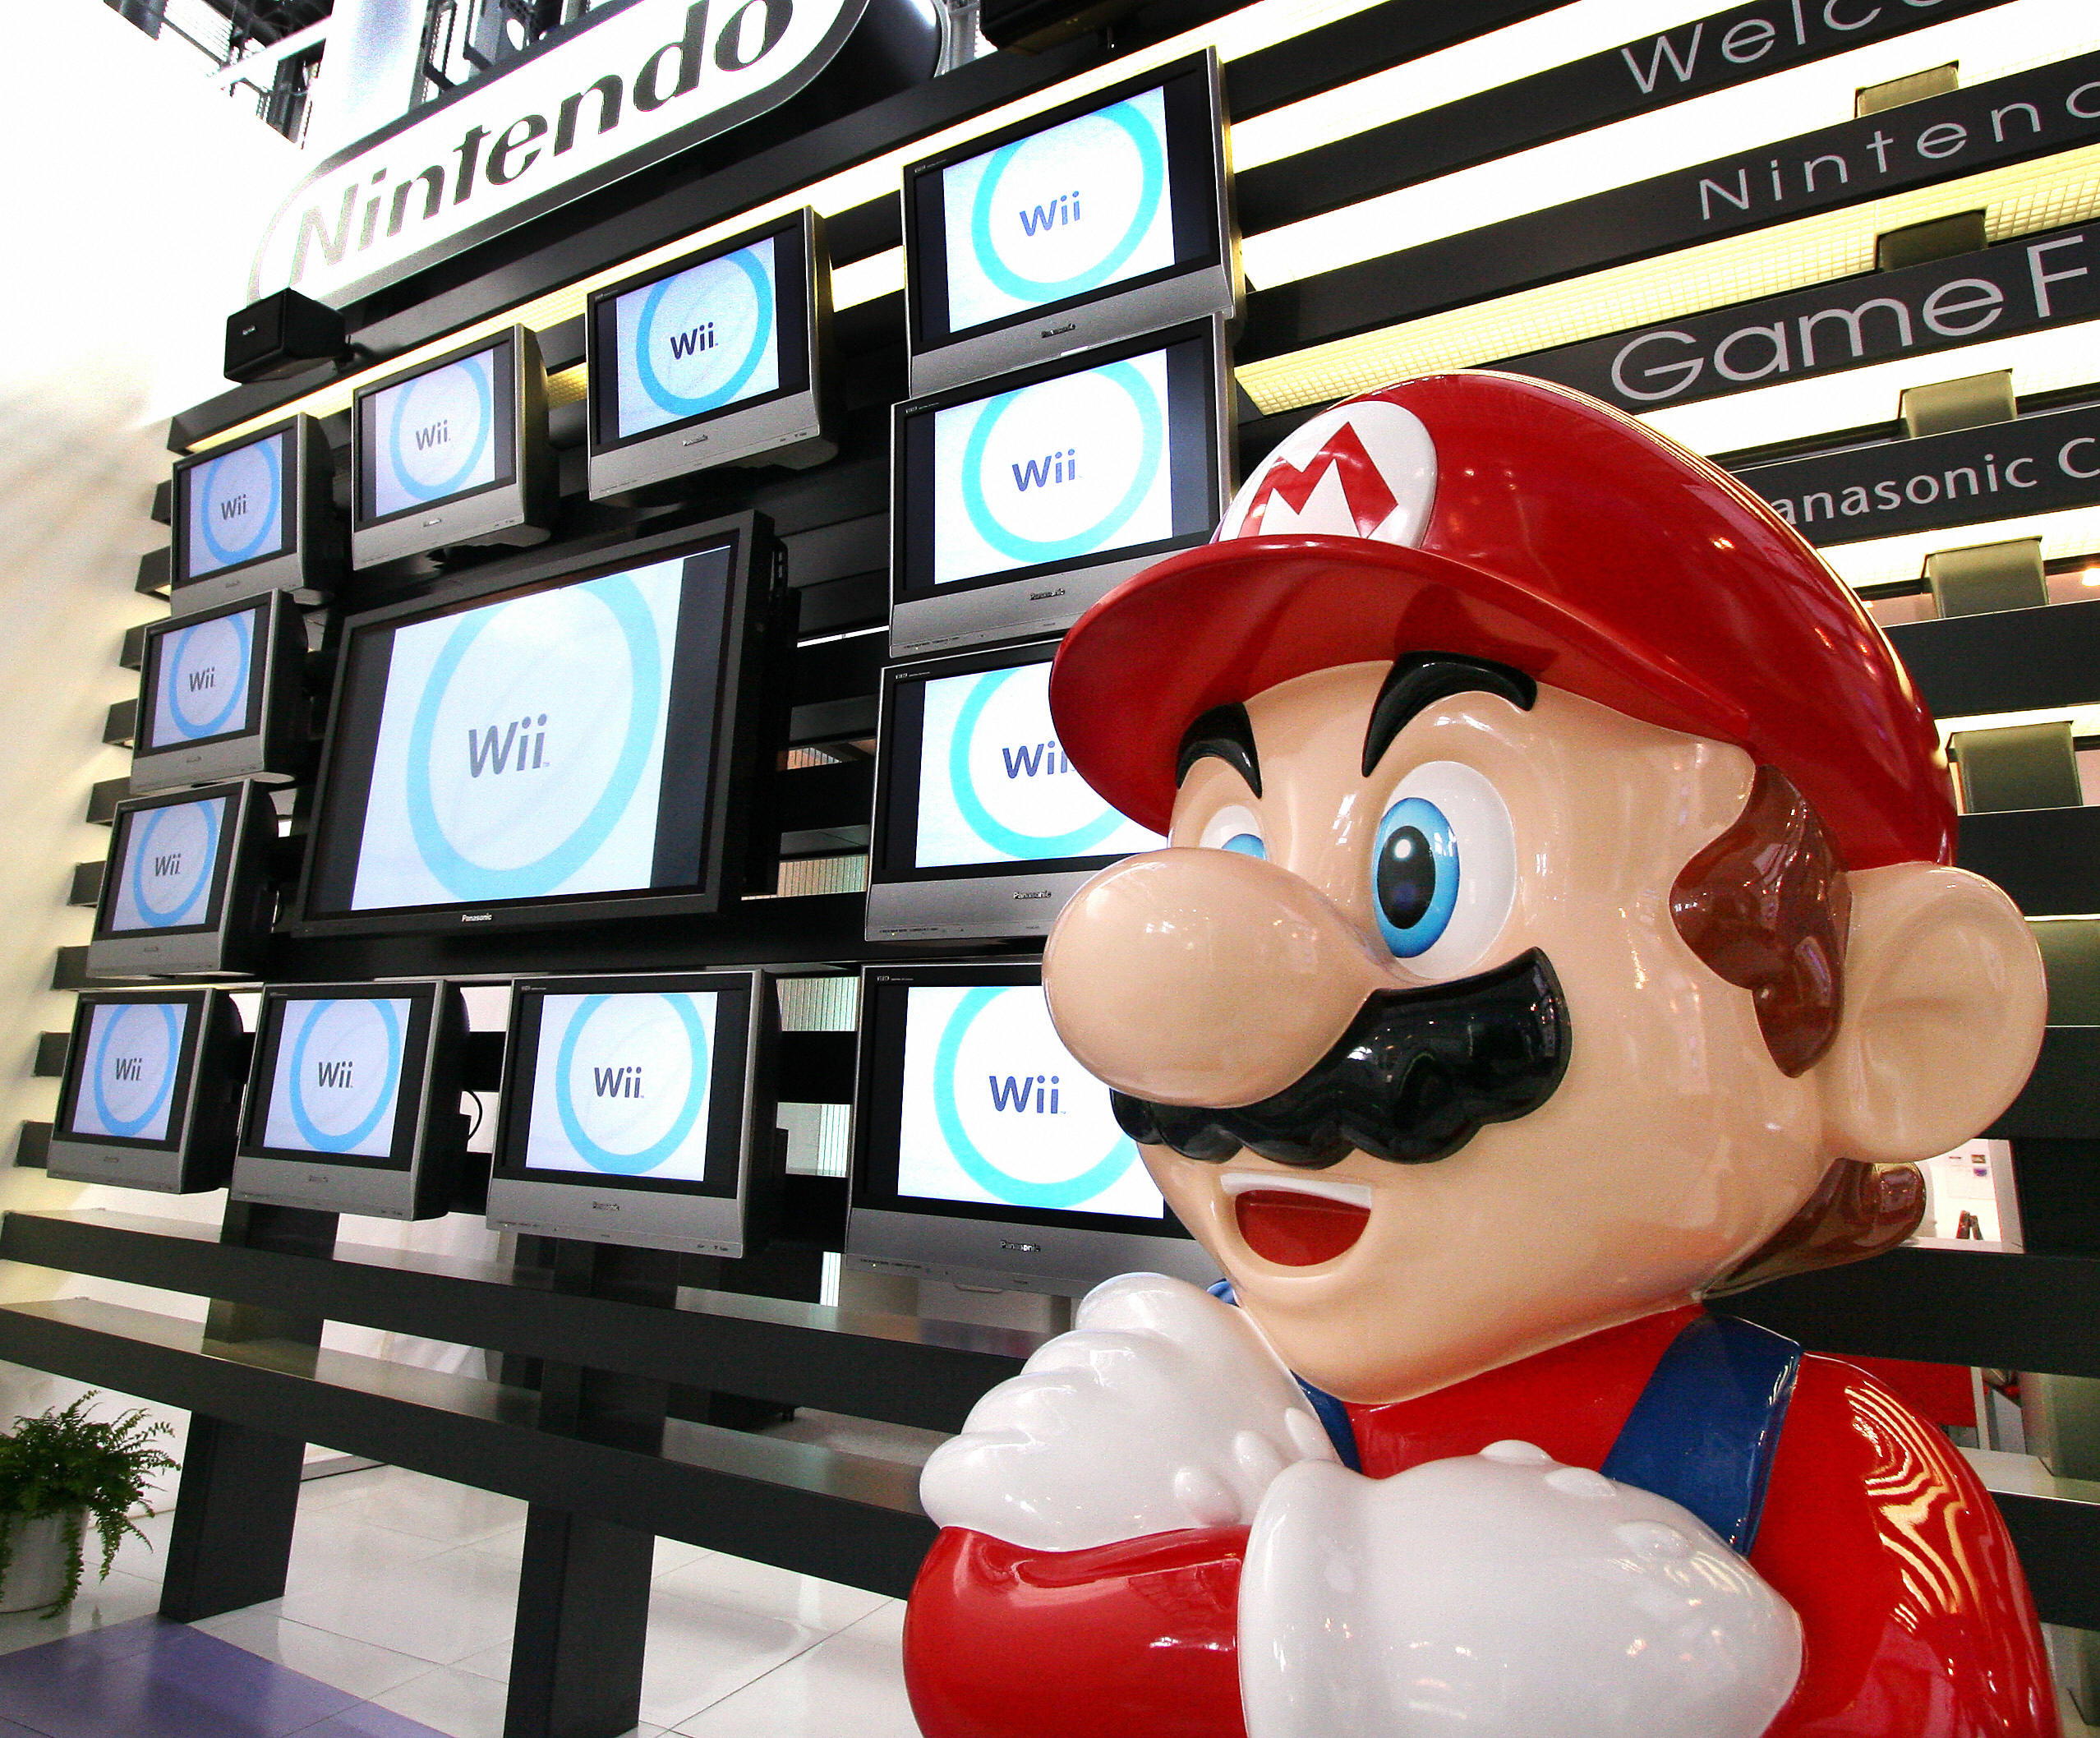 Japanese video game giant Nintendo's game character Super Mario stands at a showroom in Tokyo 25 January 2007. (YOSHIKAZU TSUNO—AFP/Getty Images)